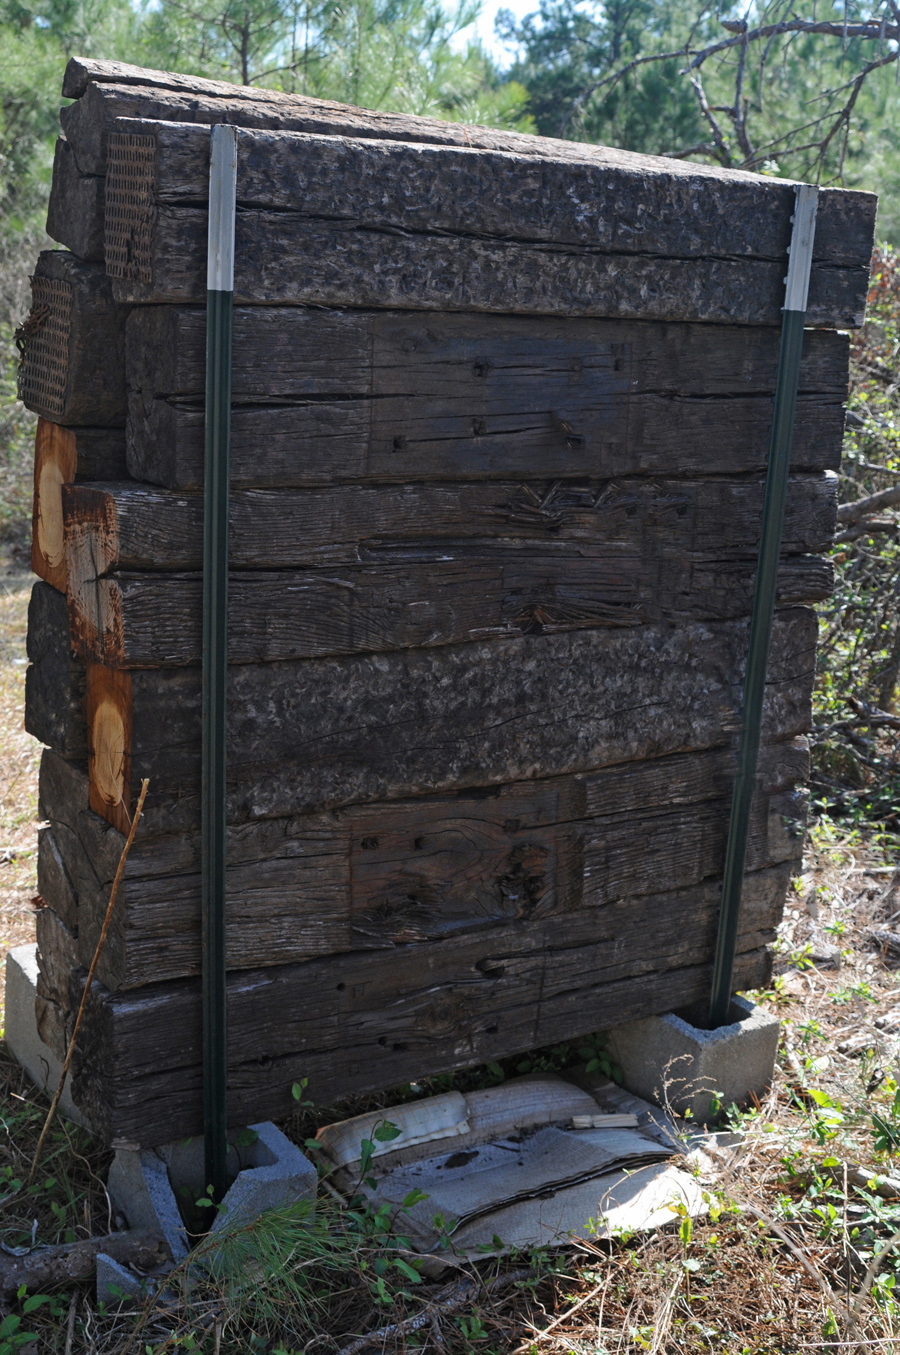 The reverse side of the completed backstop shows the crossties, both T-posts, and two cinder blocks.